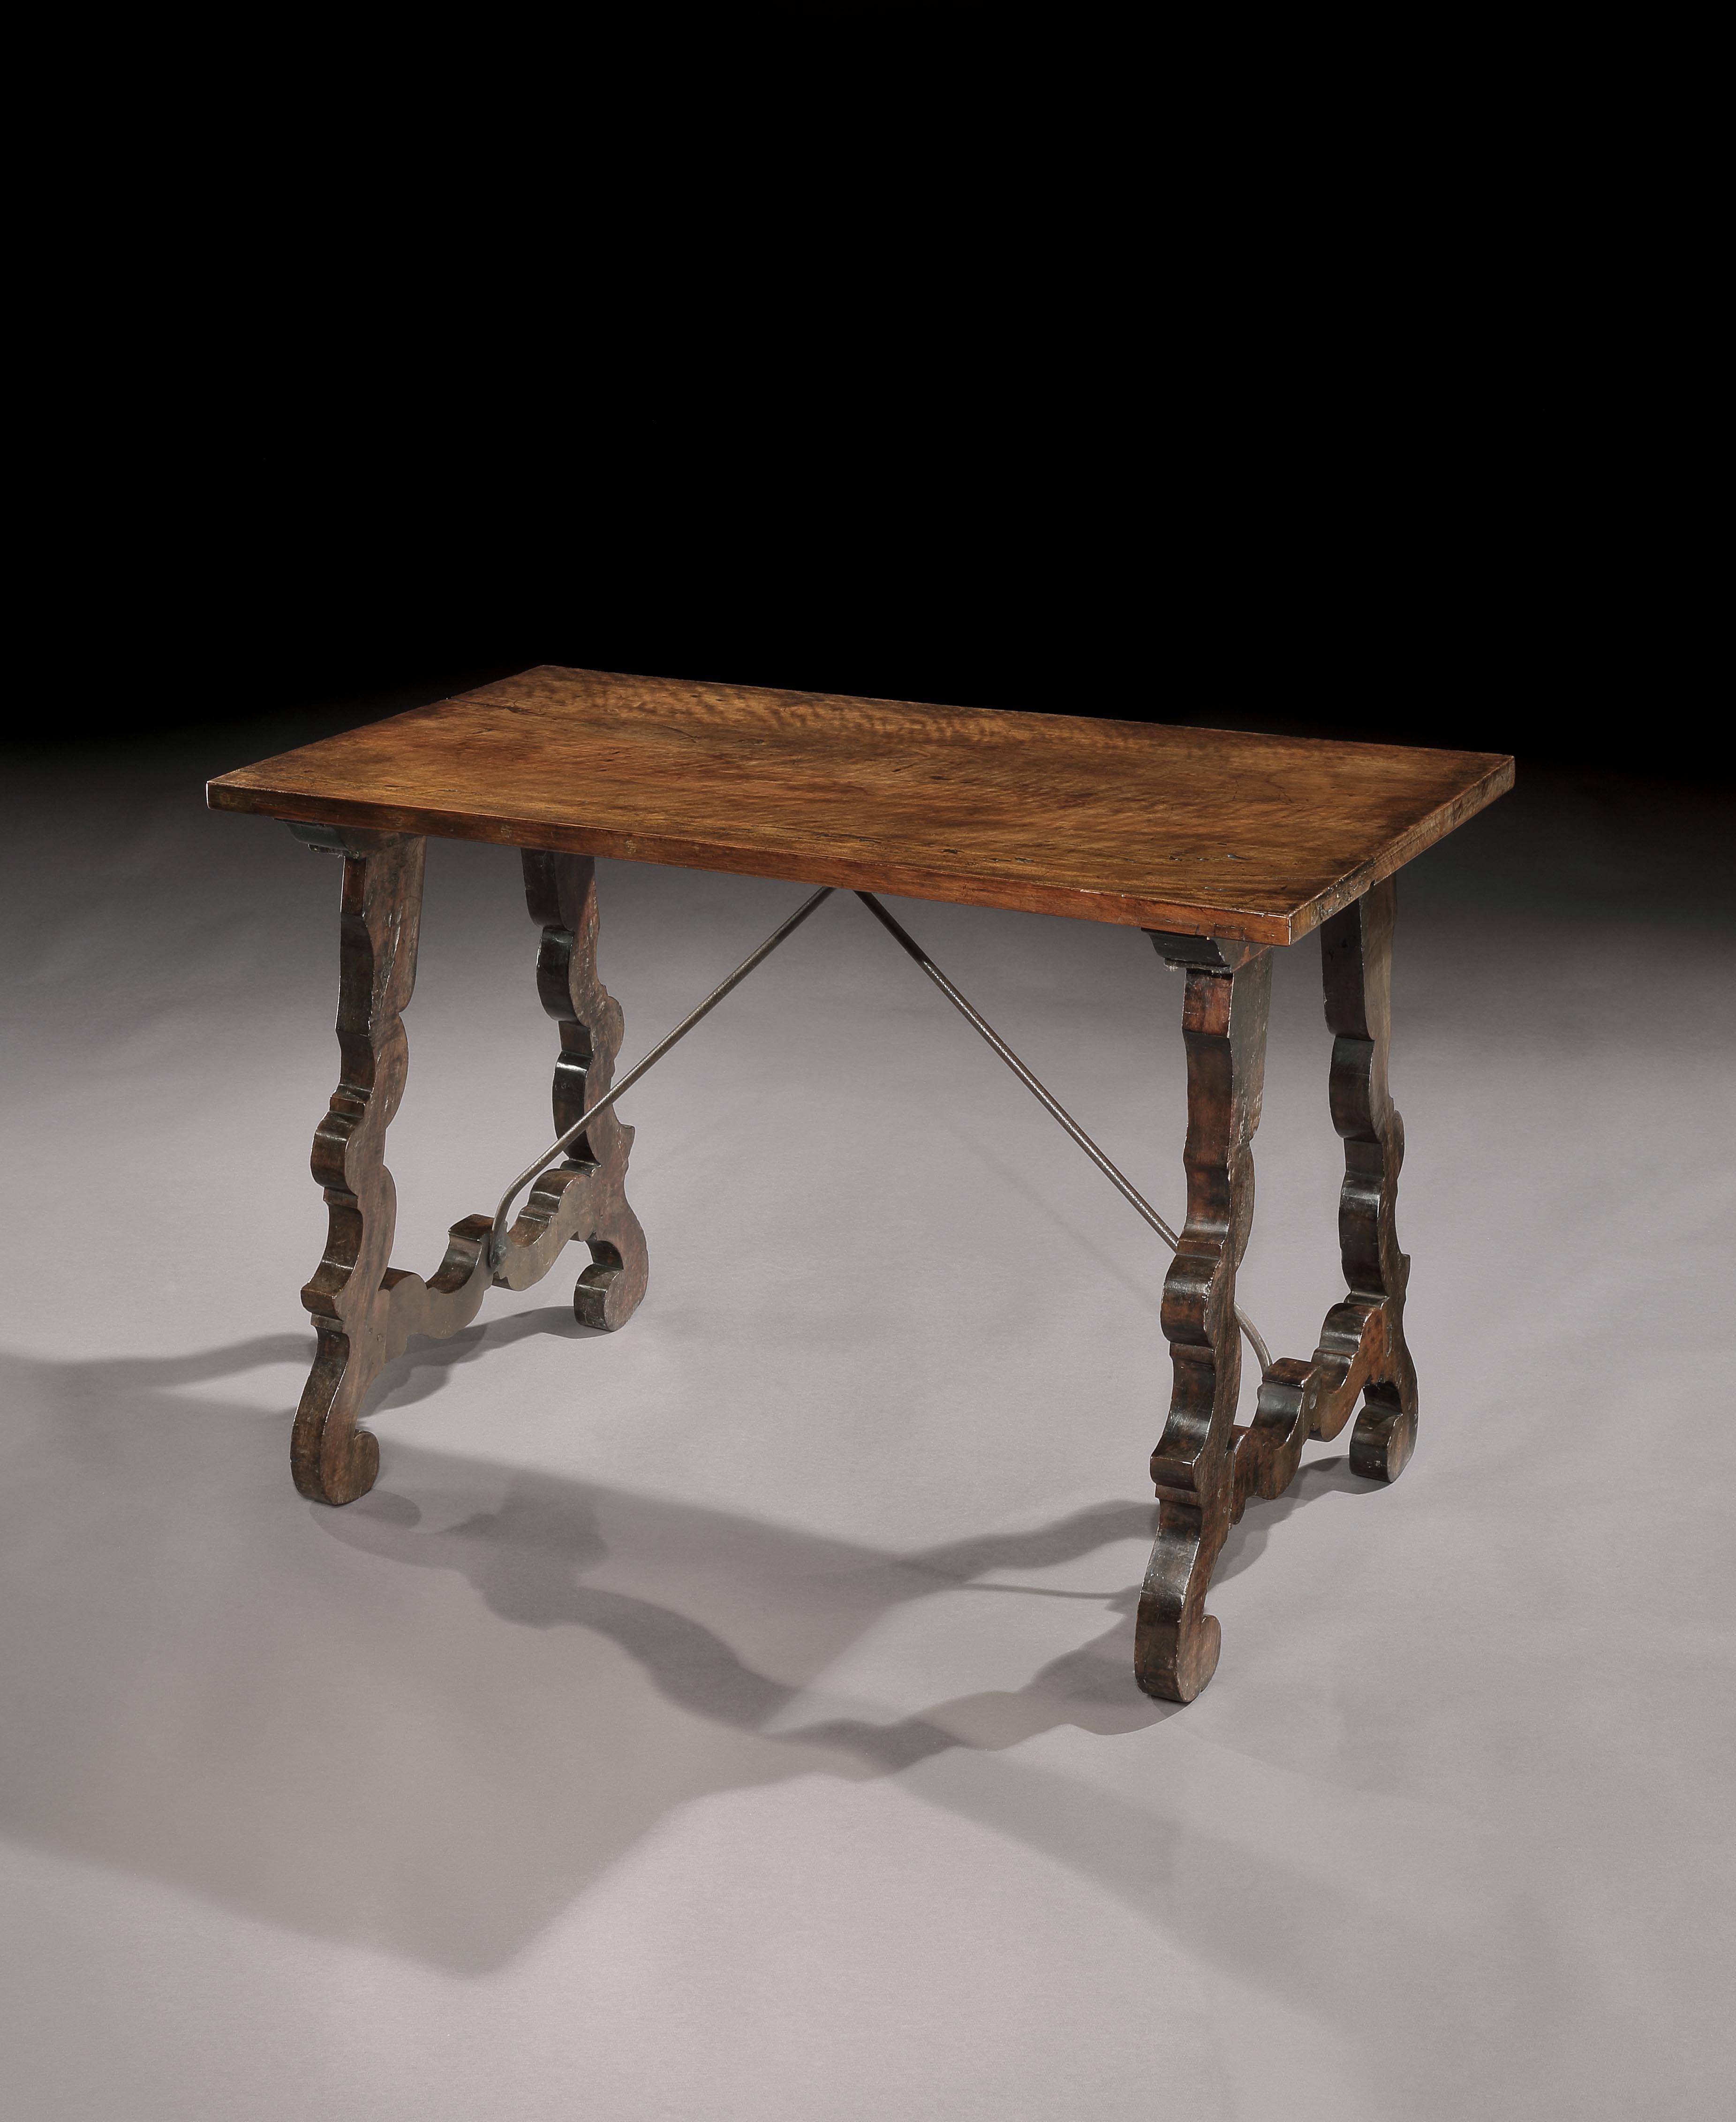 A rare, narrow, Italian, baroque, walnut, cabinet or sidetable.

This table has unusual, narrow proportions and was probably originally conceived as a stand for a table cabinet or as a sidetable for a collectors closet.

Characteristic one piece